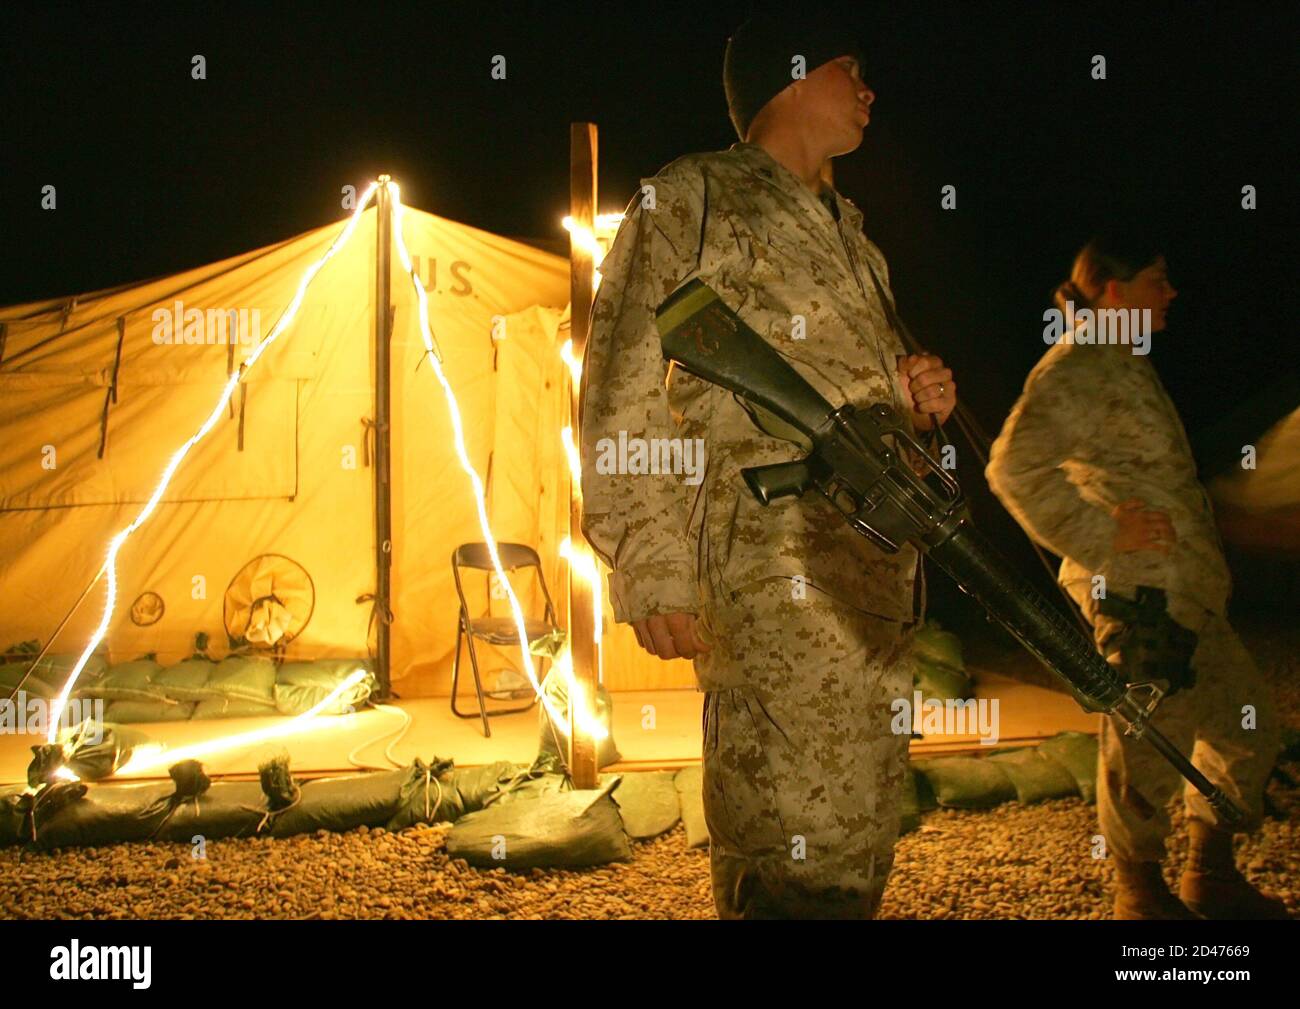 U.S Marines from 31st Marine Expeditionary Unit stand in front of a tent decorated for Christmas in their camp near restive town of Falluja, 50 kms west of Baghdad December 10, 2004. REUTERS/Shamil Zhumatov  SZH/AA Stock Photo